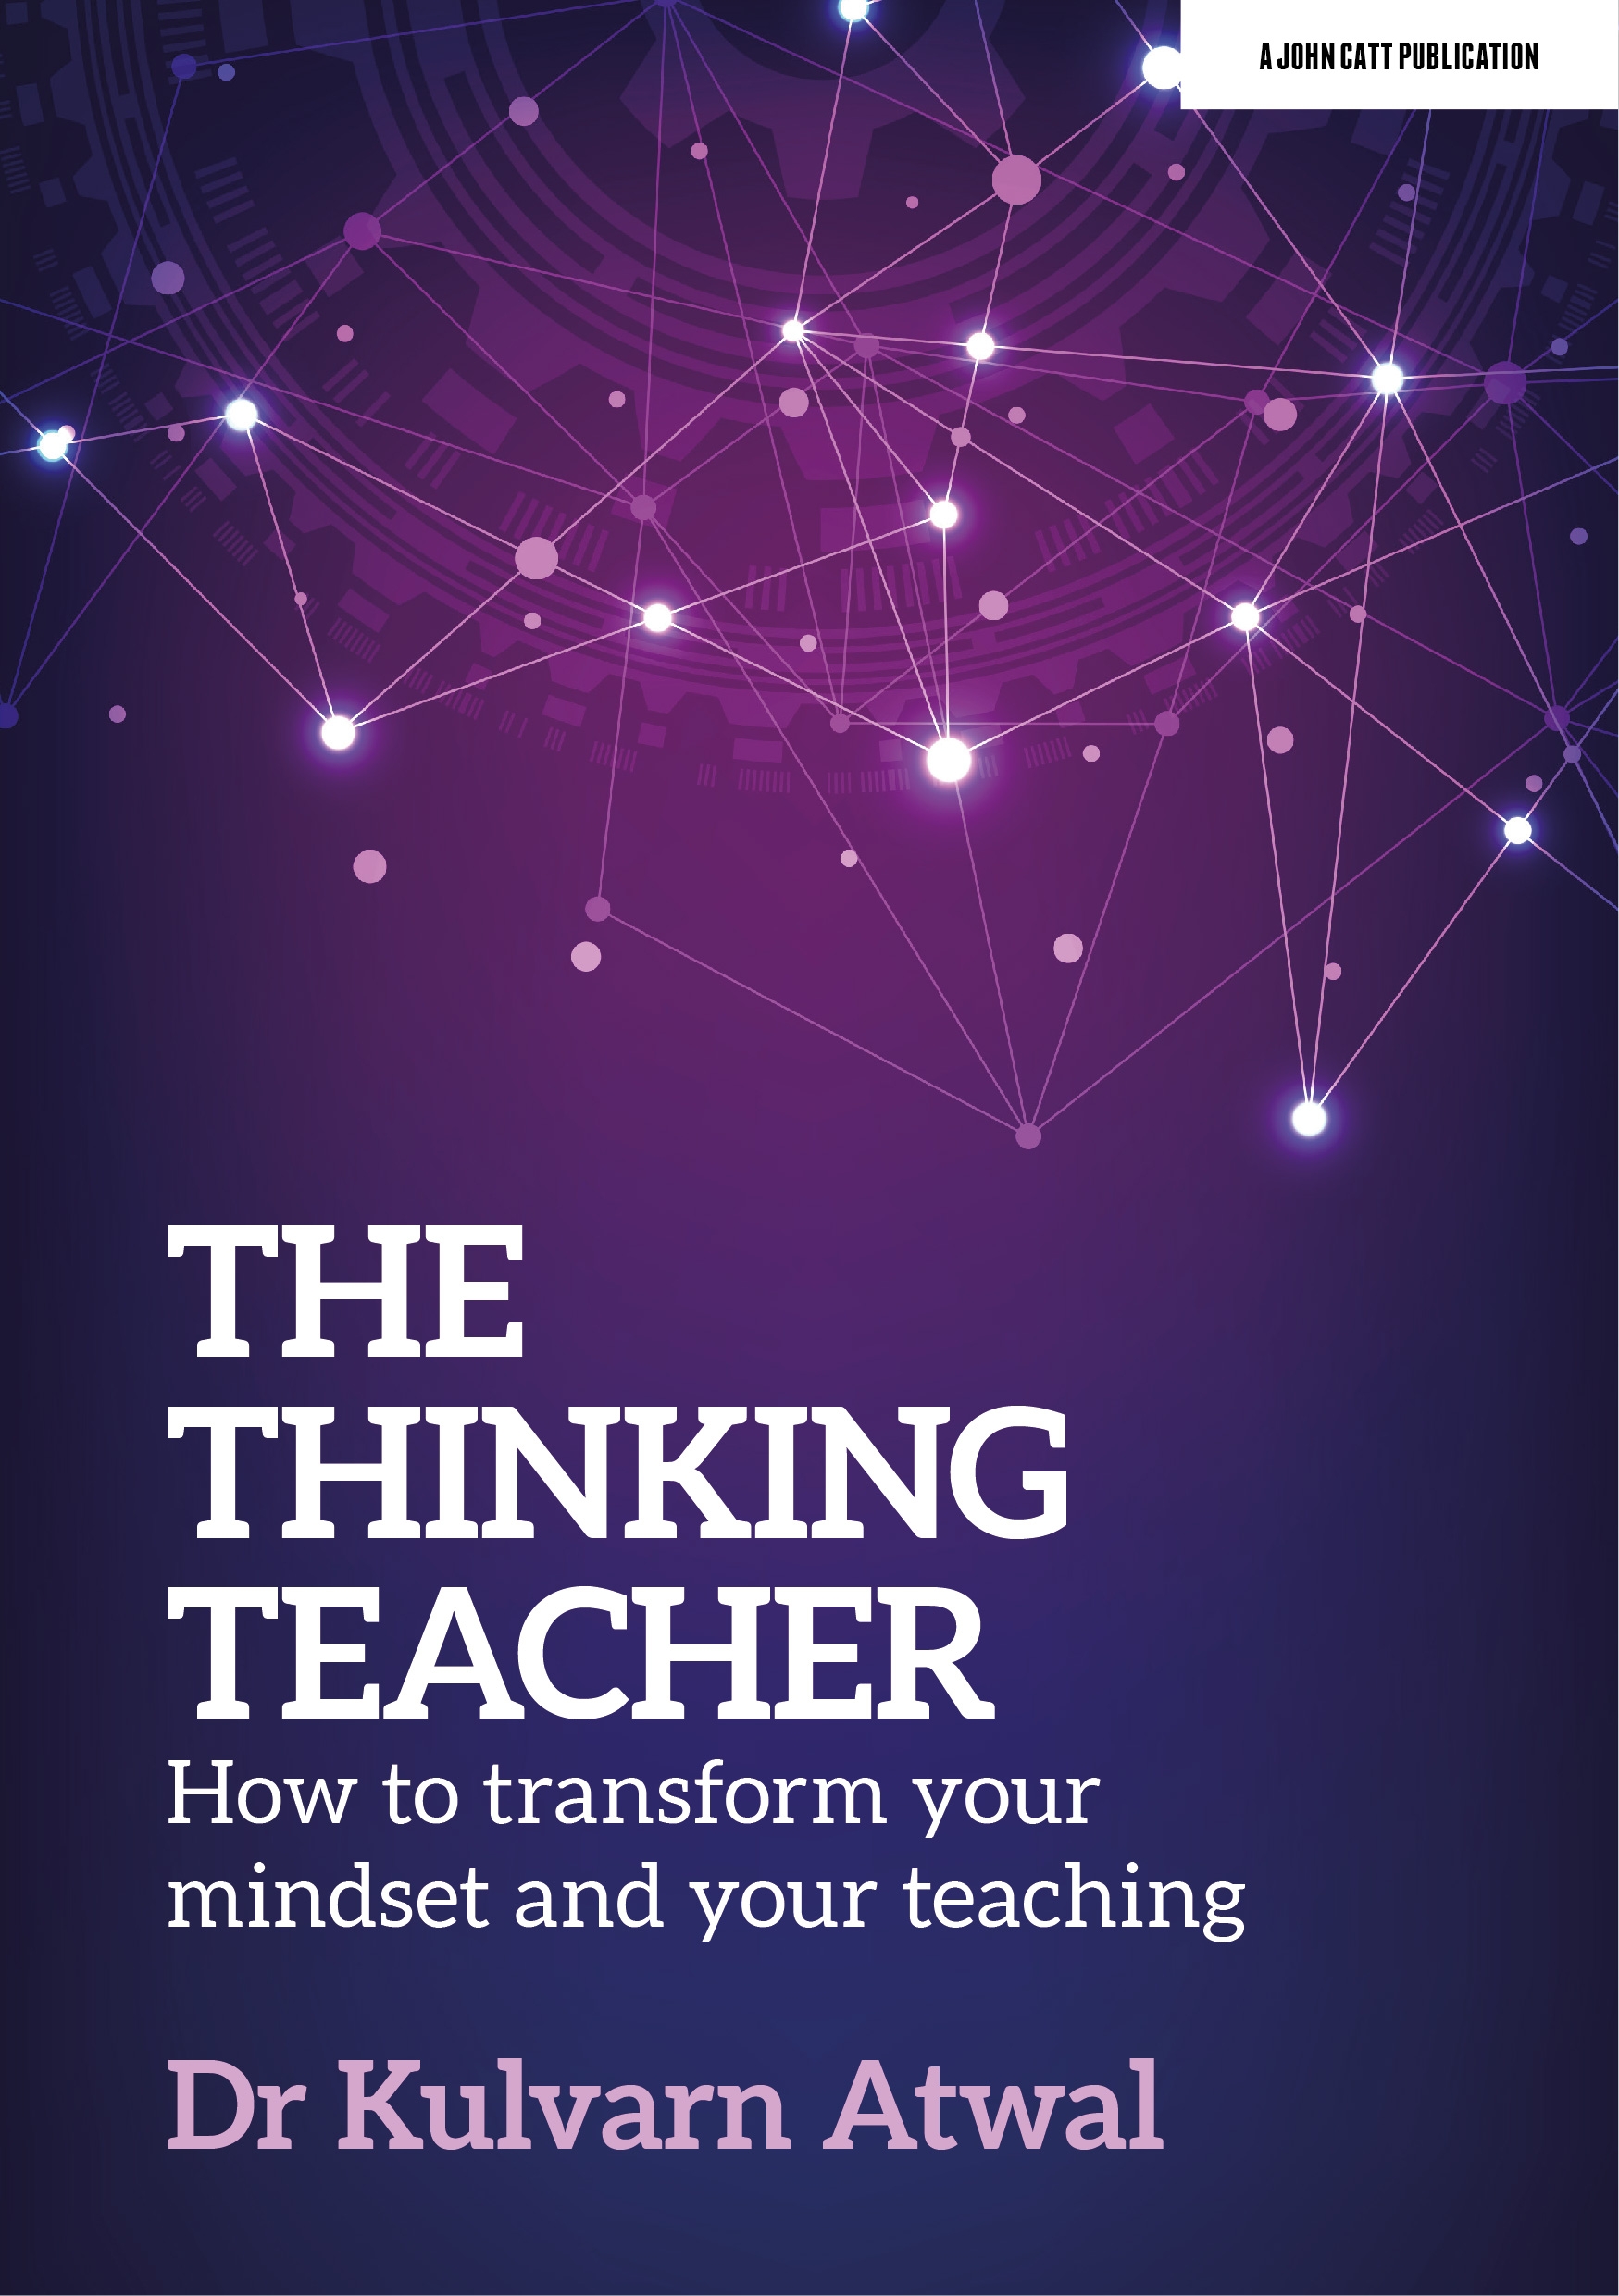 Featured image for “The Thinking Teacher: How to transform your mindset and your teaching”